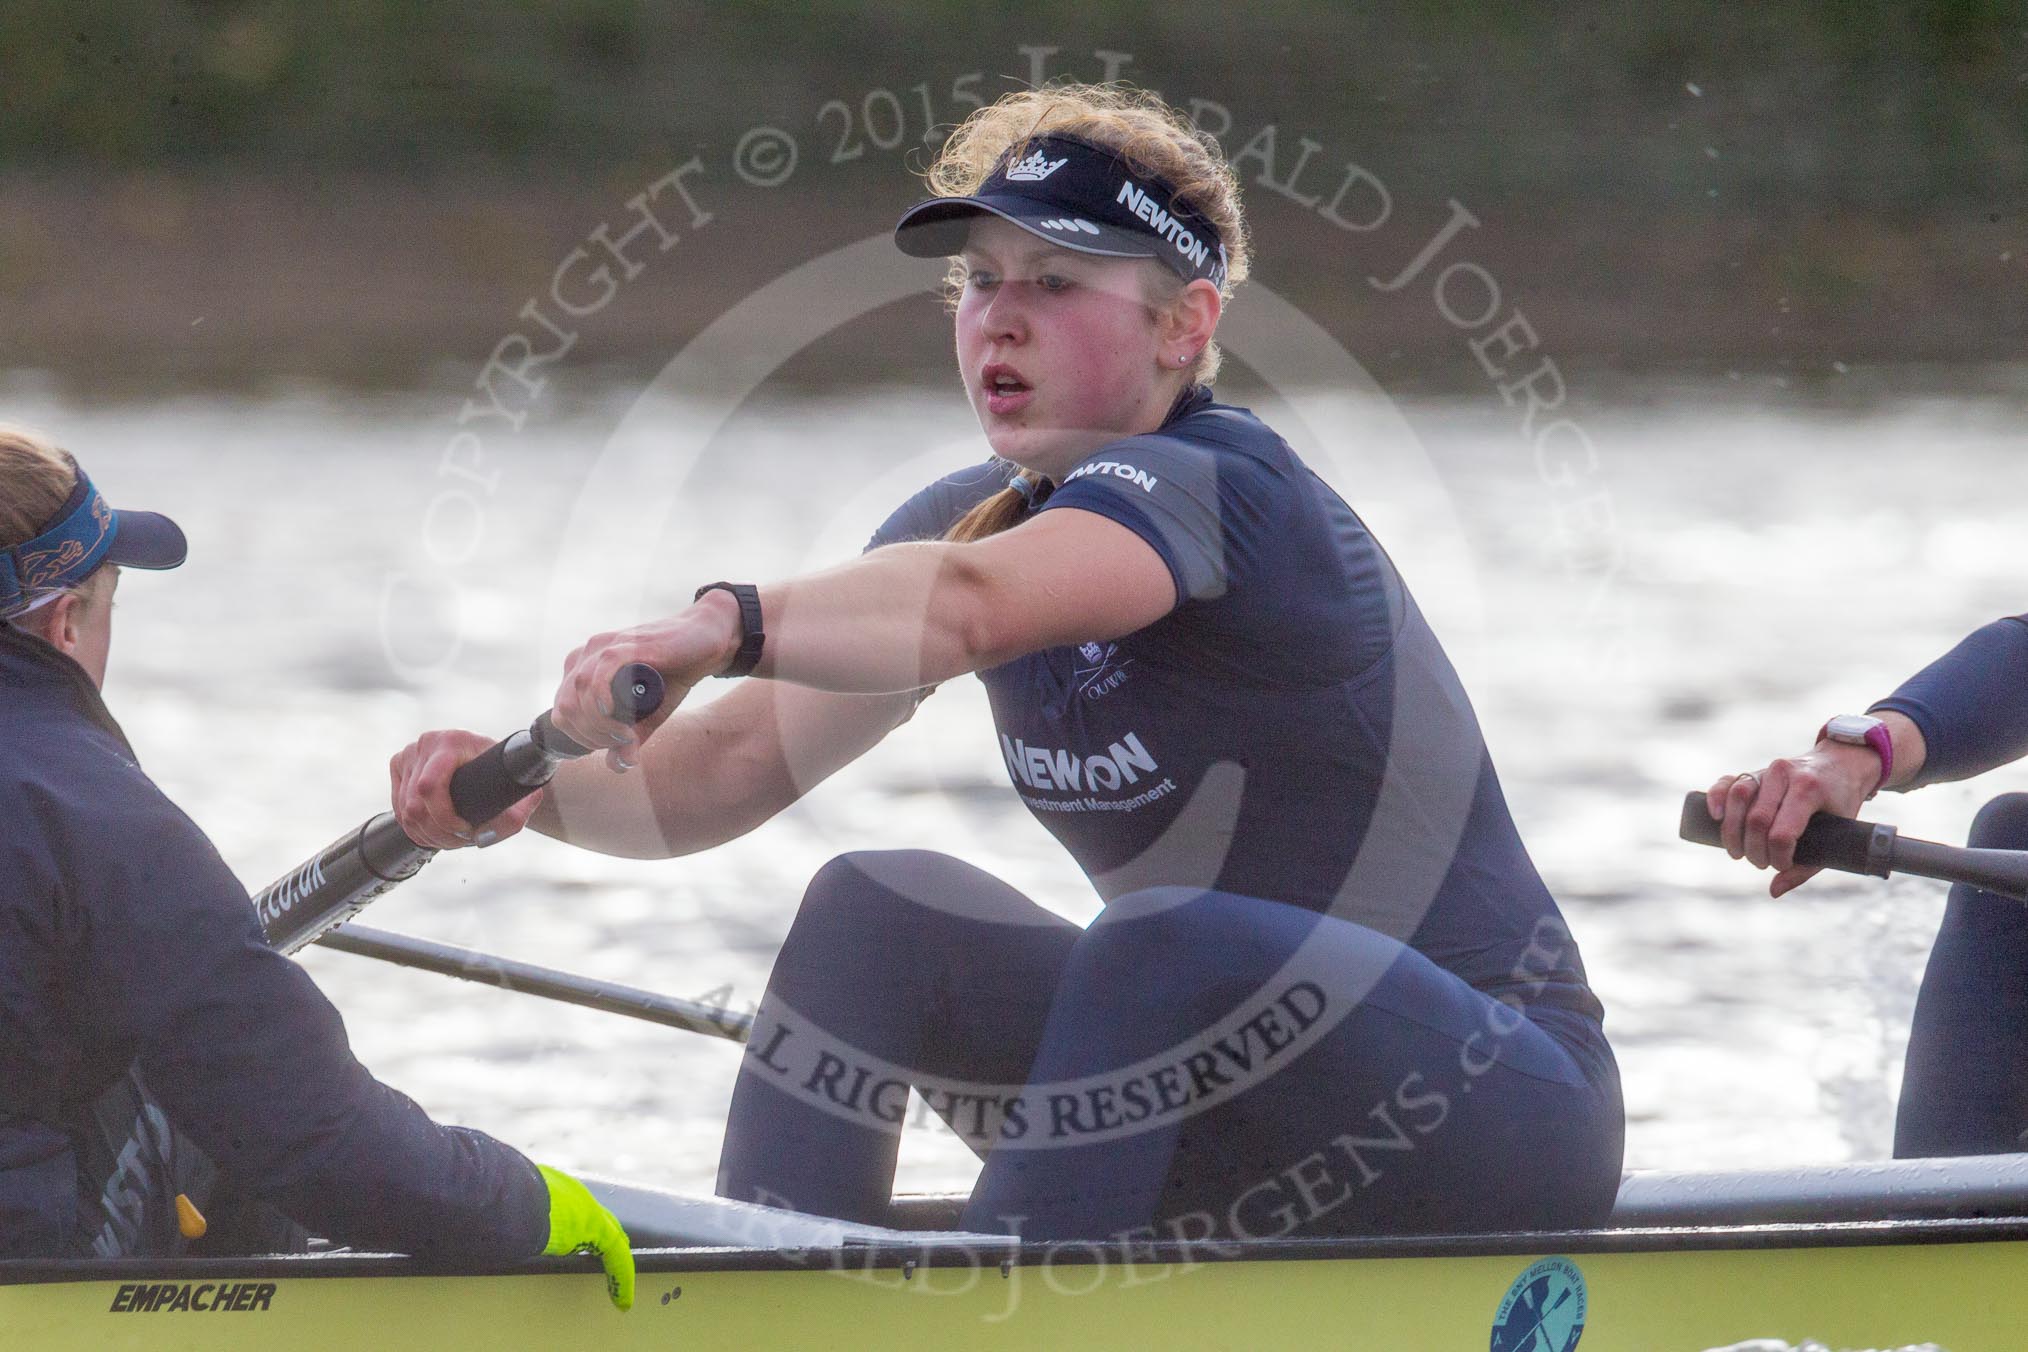 The Boat Race season 2016 - Women's Boat Race Trial Eights (OUWBC, Oxford): "Charybdis" , here stroke-Kate Erickson.
River Thames between Putney Bridge and Mortlake,
London SW15,

United Kingdom,
on 10 December 2015 at 12:29, image #258